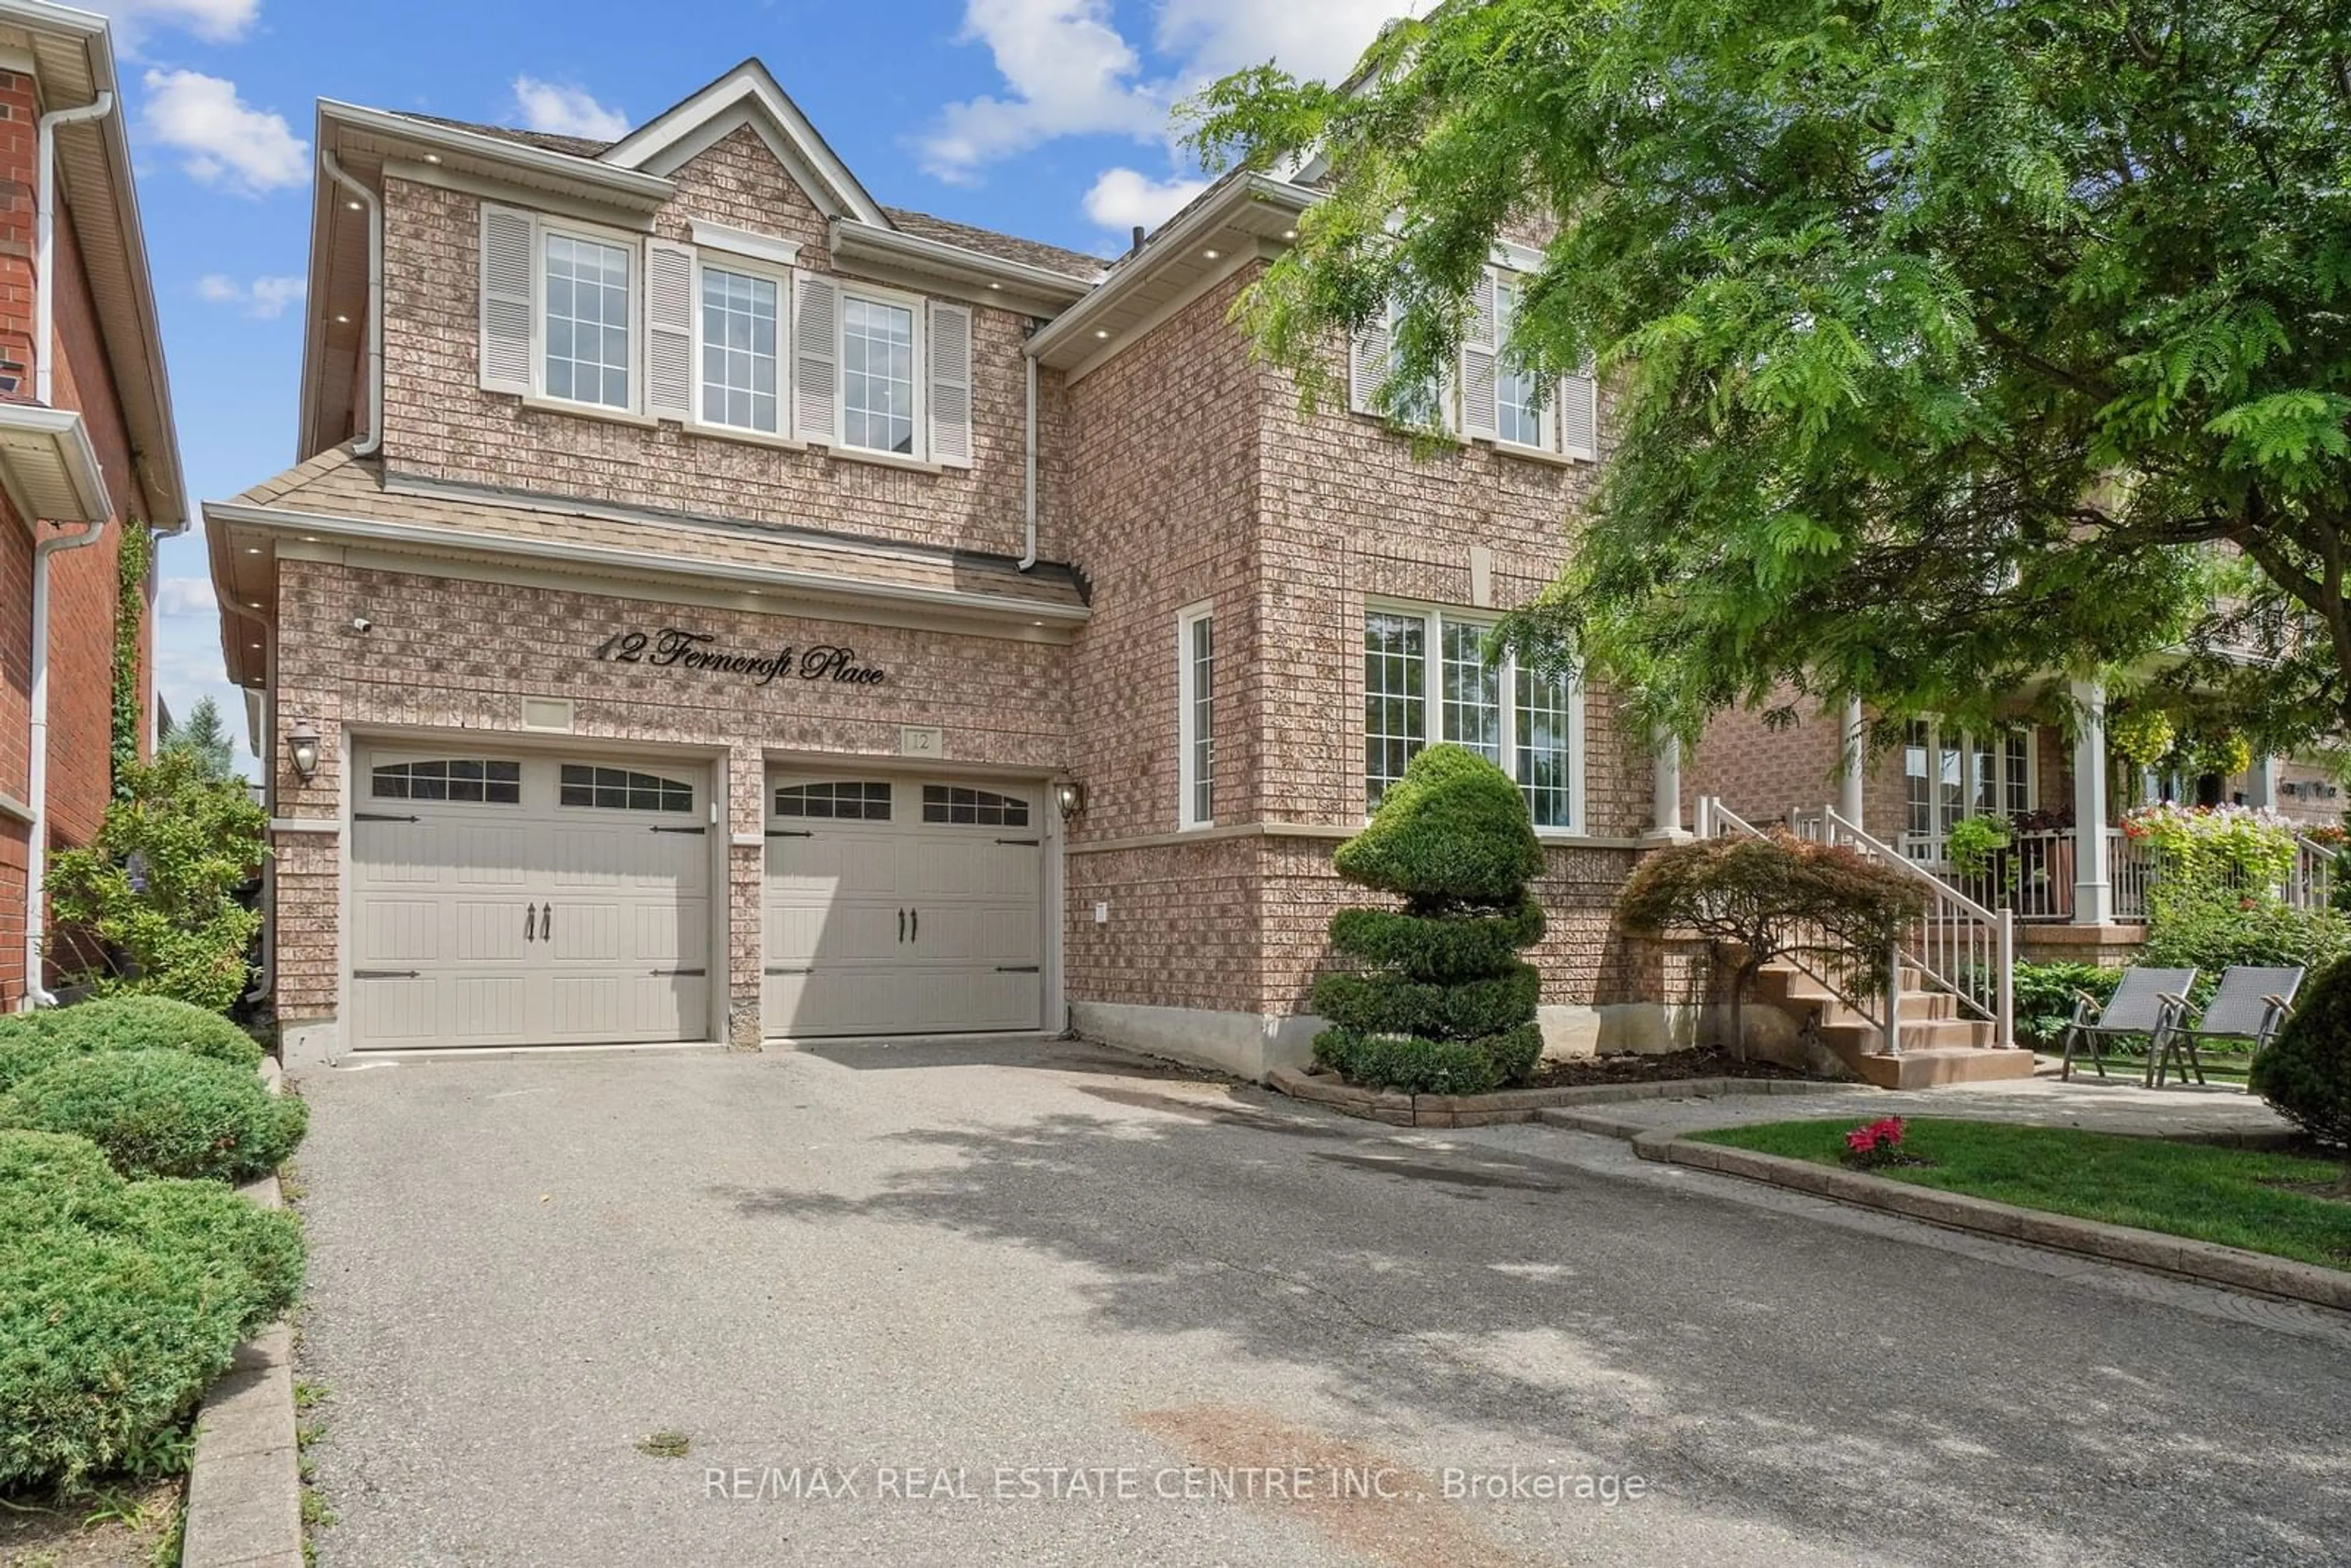 Home with brick exterior material for 12 Ferncroft Pl, Brampton Ontario L7A 2Z6